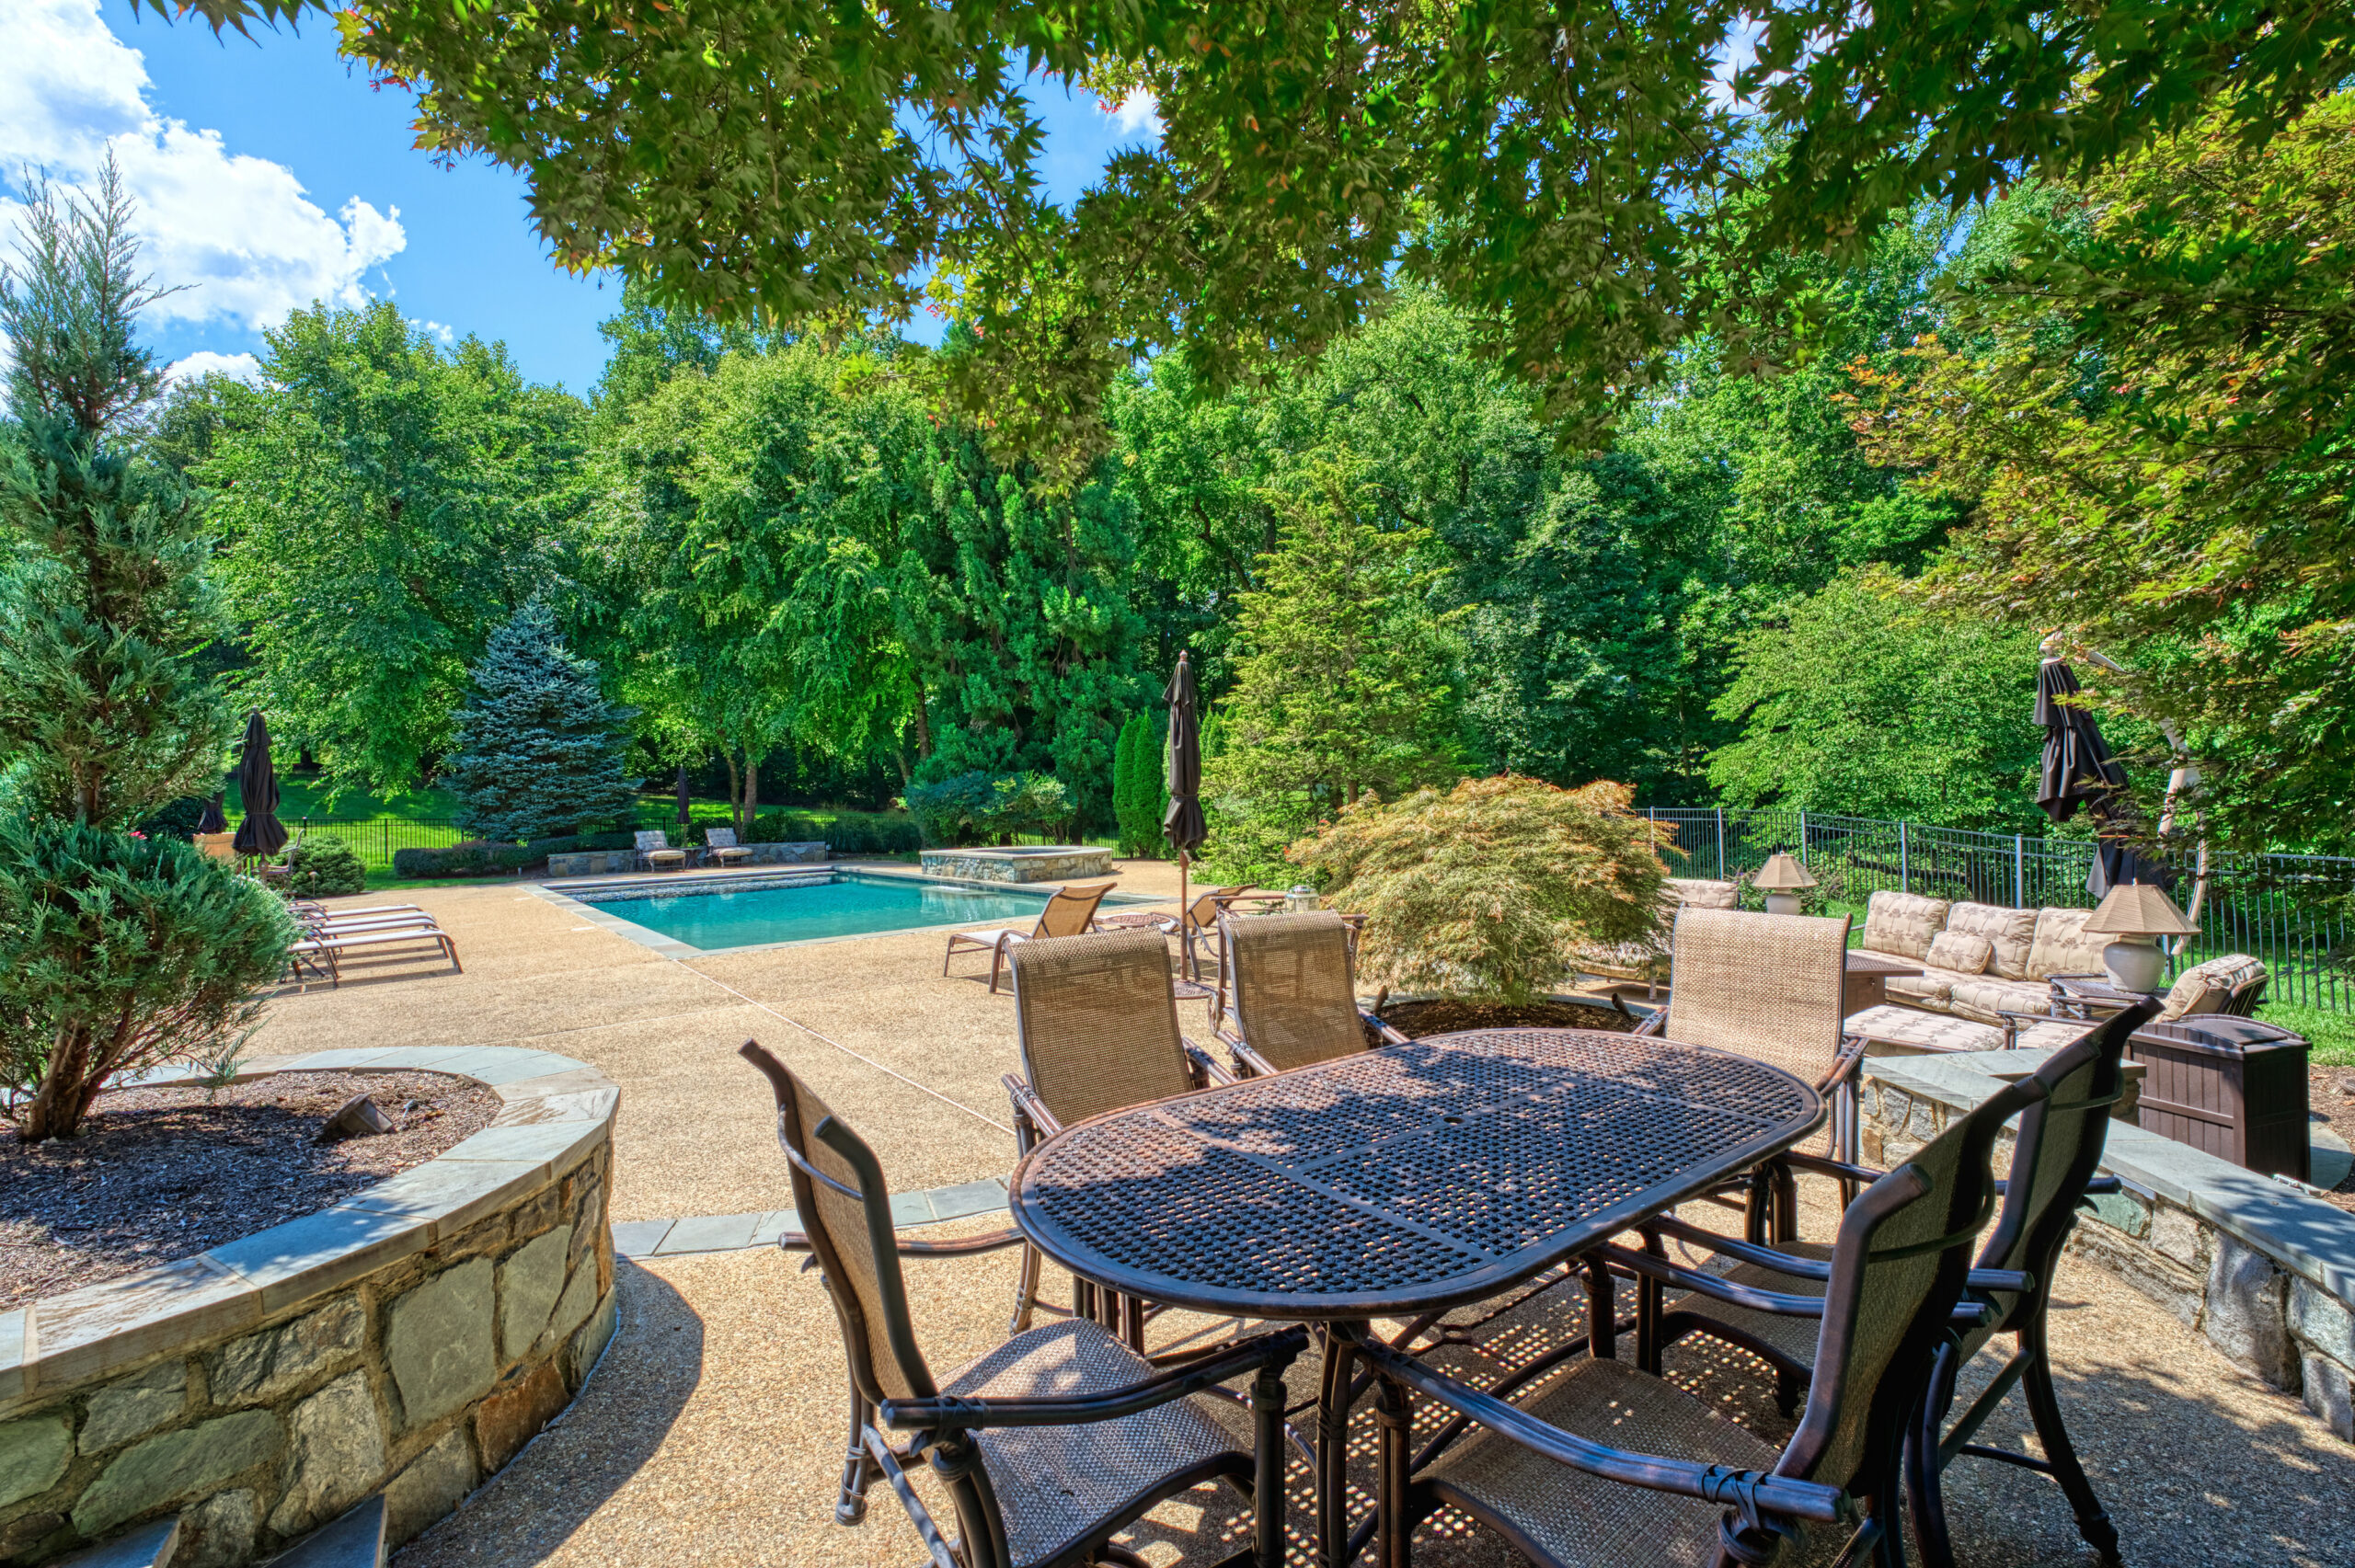 Professional exterior photo of 17087 Bold Venture Drive, Leesburg - showing the view from one of the shaded patio areas looking towards the pool